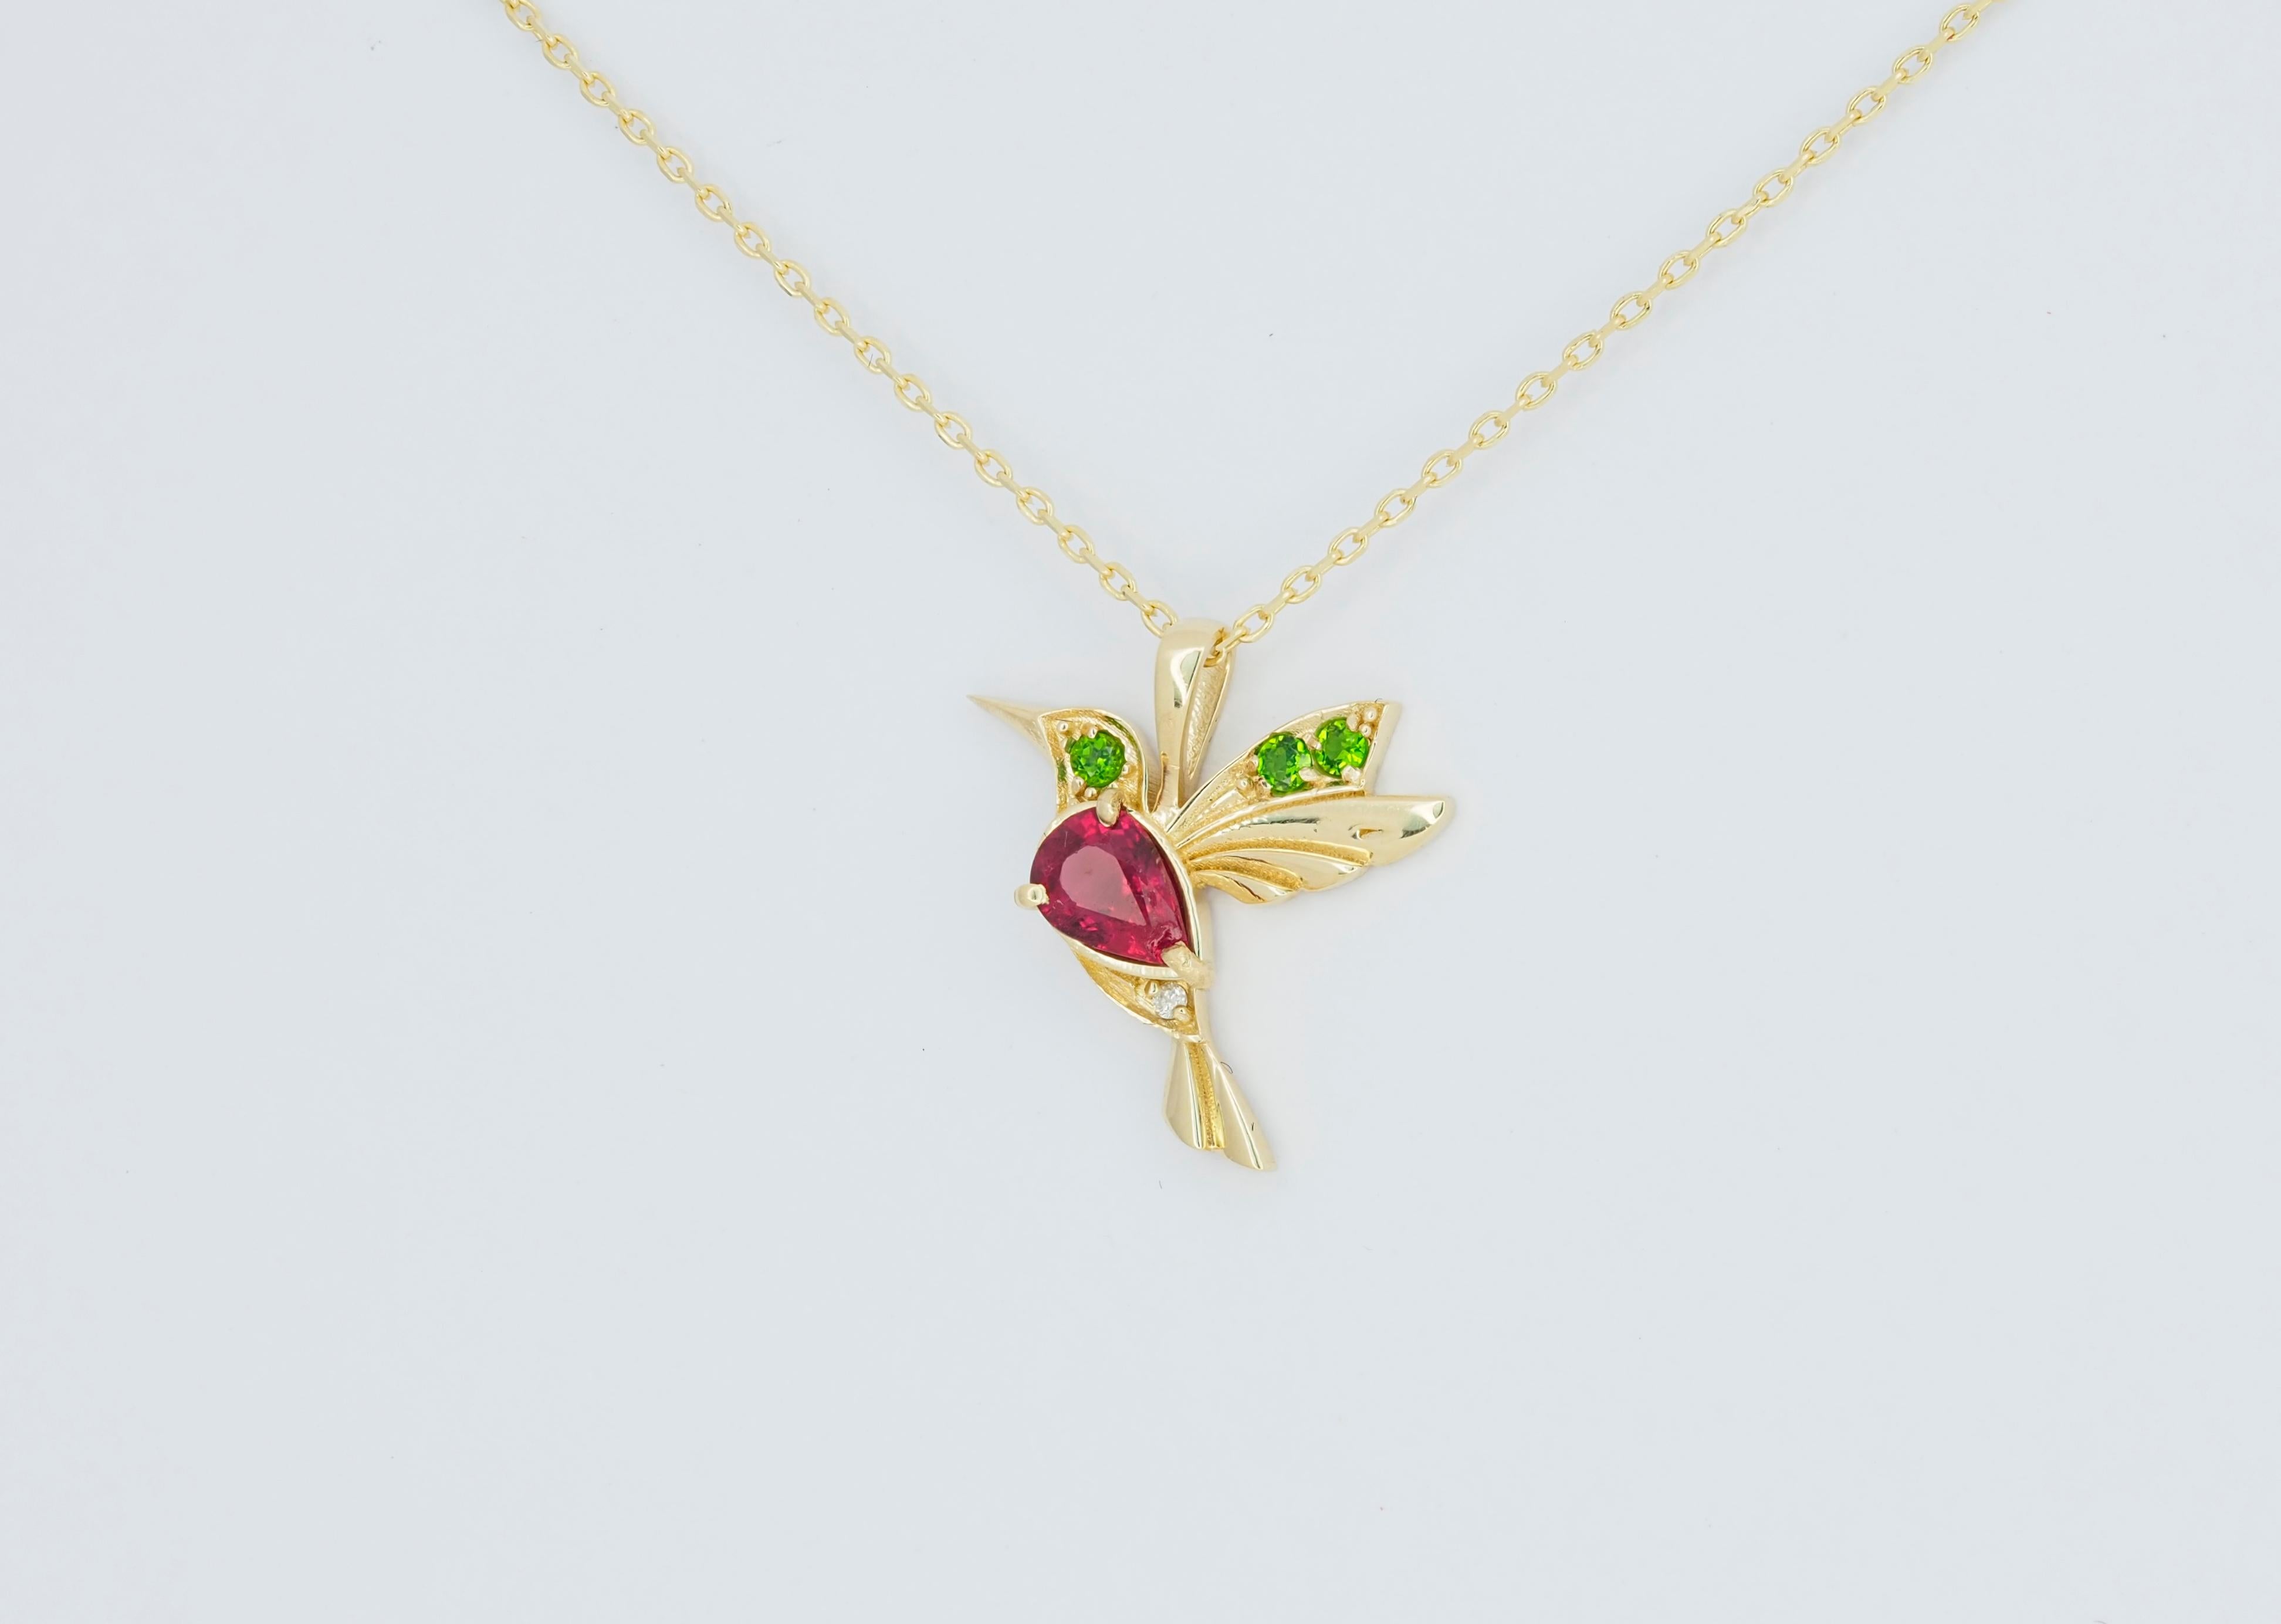 Modern 14k Gold Hummingbird Pendant with Rubies, Bird Pendant with Colored Gemstones! For Sale